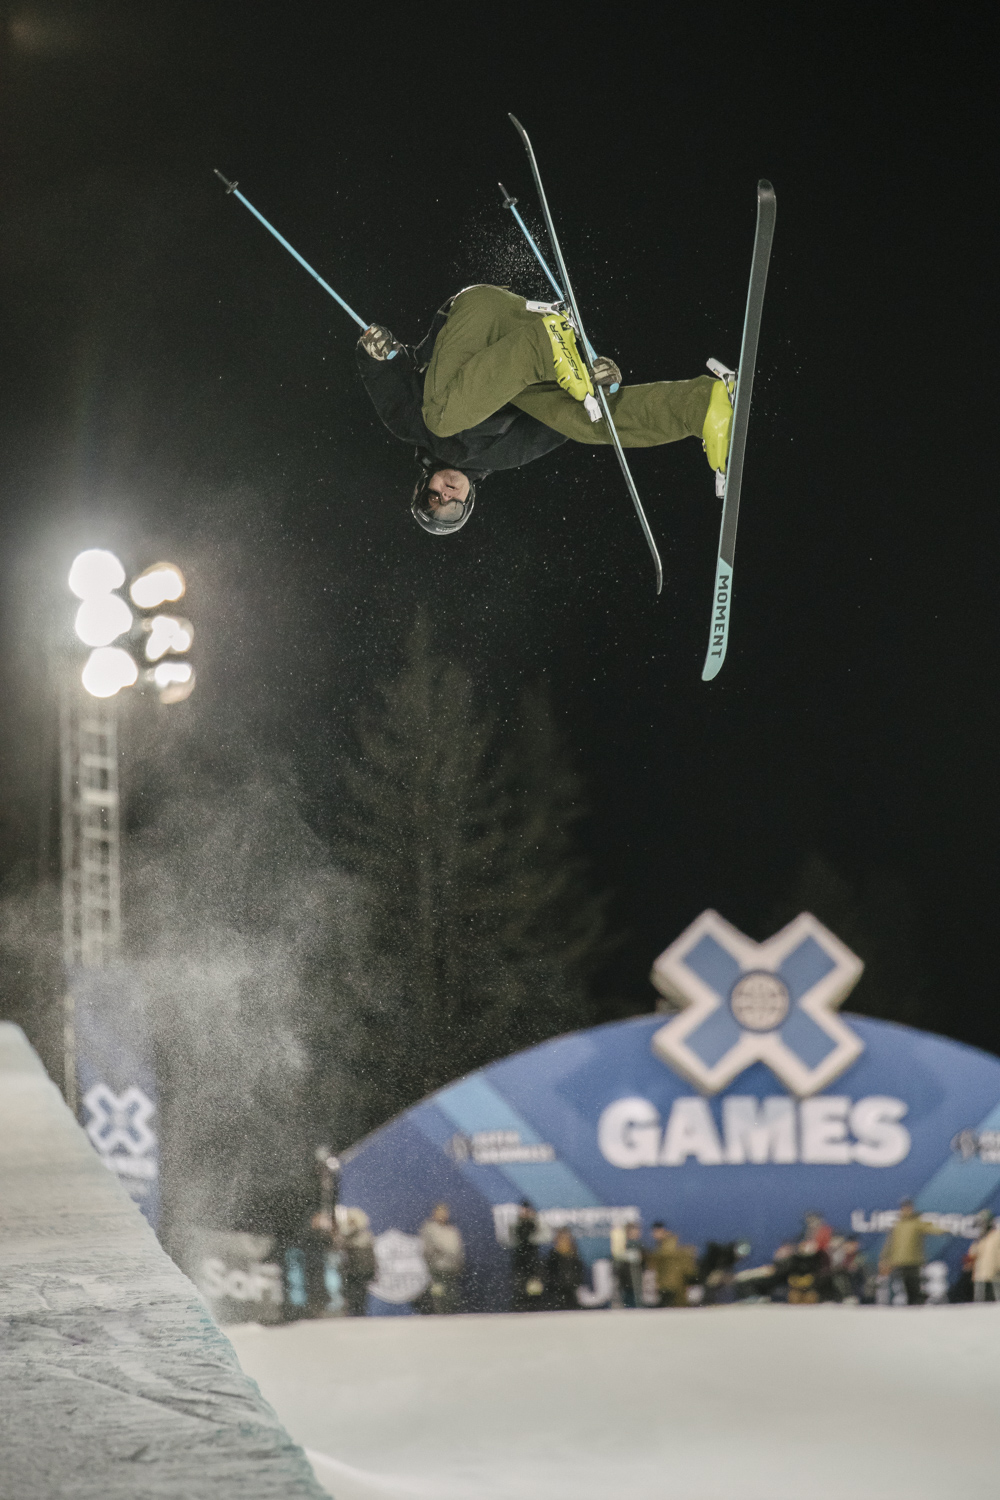 Monster Energy’s David Wise Claims 4th Gold in Men’s Superpipe Finals at X Games Aspen 2018